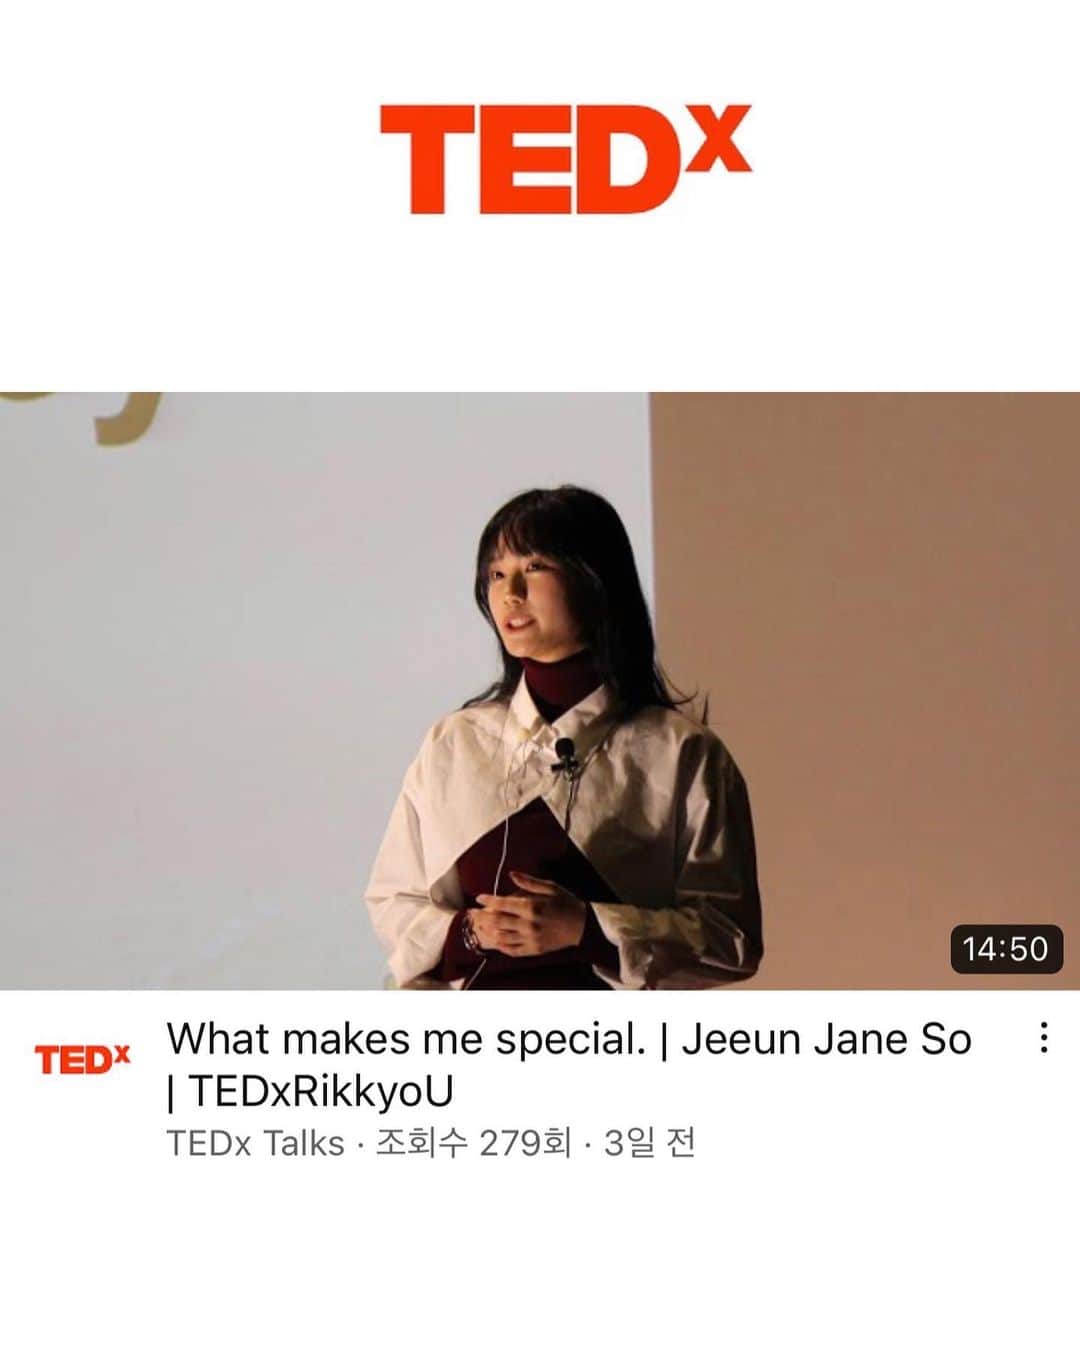 Janeぜうんさんのインスタグラム写真 - (JaneぜうんInstagram)「TEDxの公式Youtubeに私のスピーチがついにあがりました!  『What makes me special』プロフィールにリンクあるので見てみてください💭  今年のTEDxRikkyoUのテーマは「自分らしさとは何か」 でも考えれば考えるほど難しかったので”What makes me special”と質問を変えてみました。  生まれ育ってきた背景が周りとは違い昔から何ともいえない疎外感を感じたり、自分のアイデンティティがworthlessに感じ、劣等感に浸って色々悩んだ学生時代を経て、感じた自分なりの答えをトークの中で語りました。  忙しく毎日を生きる私たちですが、みんなも一度止まって考えてみてください!!  みんなにとってWhat makes me specialとは?  じぇーんサブスクライバーのみんなに届けっという事で英語で喋りました。大きな舞台だったので凄い緊張しちゃってゆっくり喋ってるところもありますが、そういうところも含めて私らしいトークになったかなと思います😂 All Glory to GOD!  GOD BLESS everyone🌼 ——————————————-  My speech is finally up on the official TED Youtube! Check out the link in my profile 💭  The theme of this year's TEDxRikkyoU was "What makes me special? But the more I think the more difficult it was, so I changed the question to "What makes me special".  Living as a foreigner living in japan, I have always felt a sense of indescribable alienation and I was immersed in a sense of inferiority and had many problems as a student.  We are all busy in our daily lives, but let’s stop and think about this question,  “What makes me special” to you?  I spoke in English to deliver the message to everyone of you guys. I was super nervous because of this big stage, so I spoke slowly at times, but including those parts make it unique and showcase real me.  Anyway thank you everyone and  Thank you Jesus, All Glory to GOD! GOD BLESS 🌼」5月3日 16時05分 - jeeunso4you